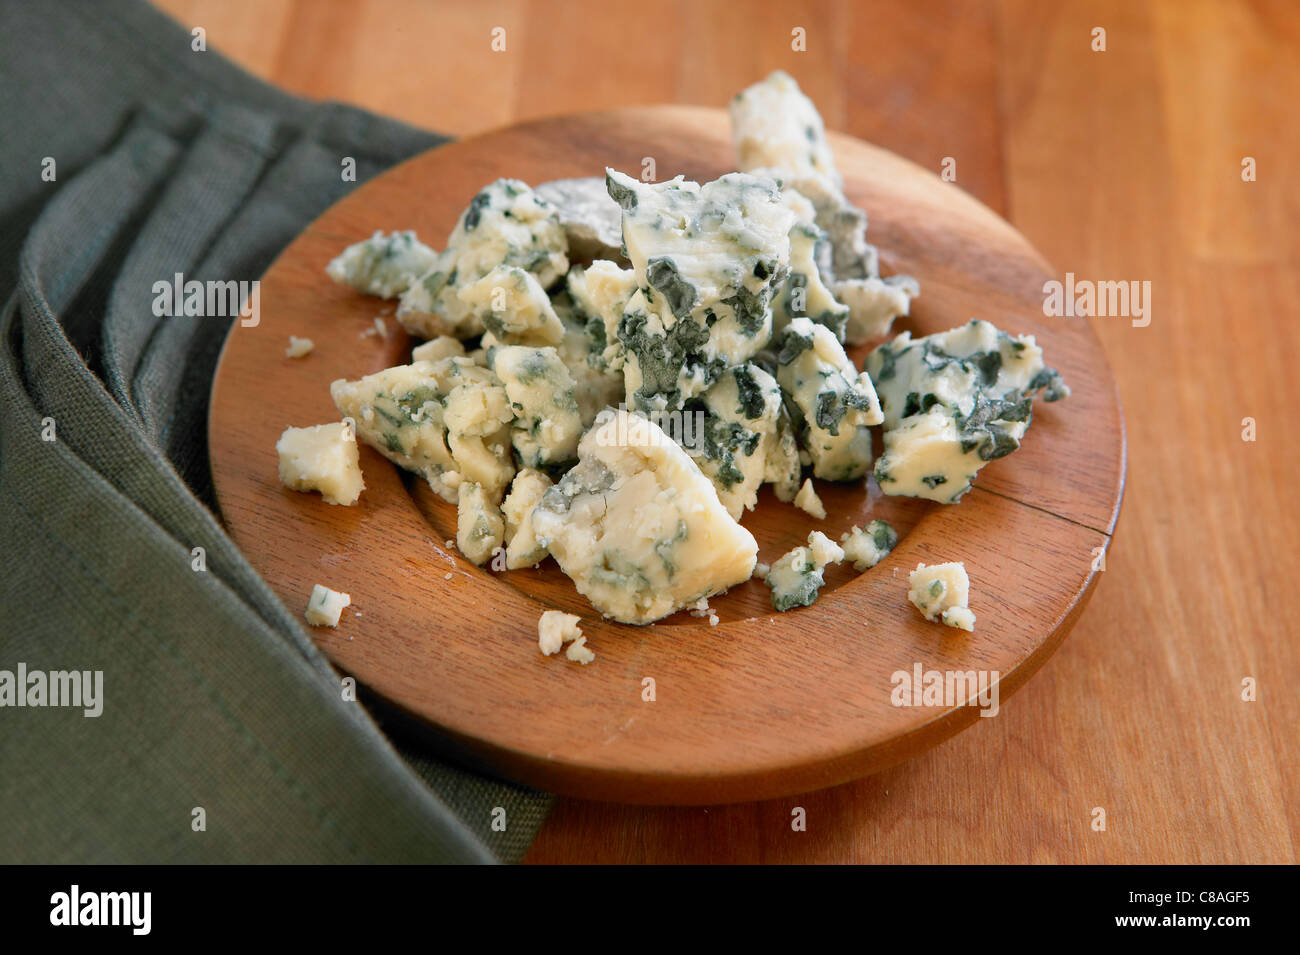 Crumbled blue cheese Stock Photo